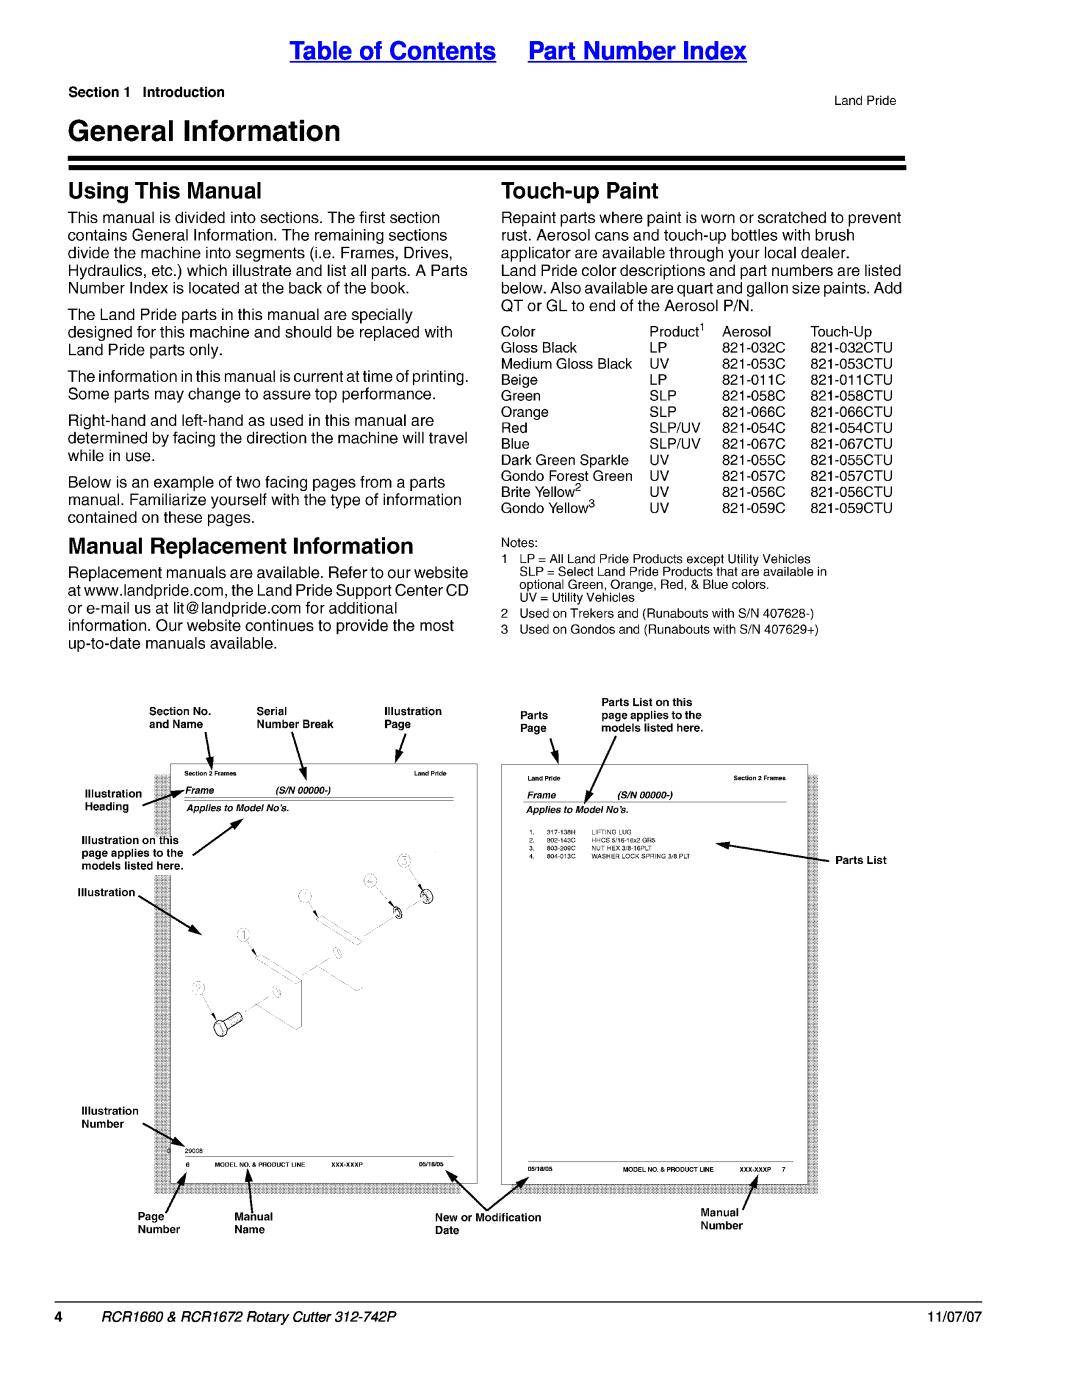 Land Pride manual Table of Contents Part Number Index, RCR1660 & RCR1672 Rotary Cutter 312-742P, 11/07/07 